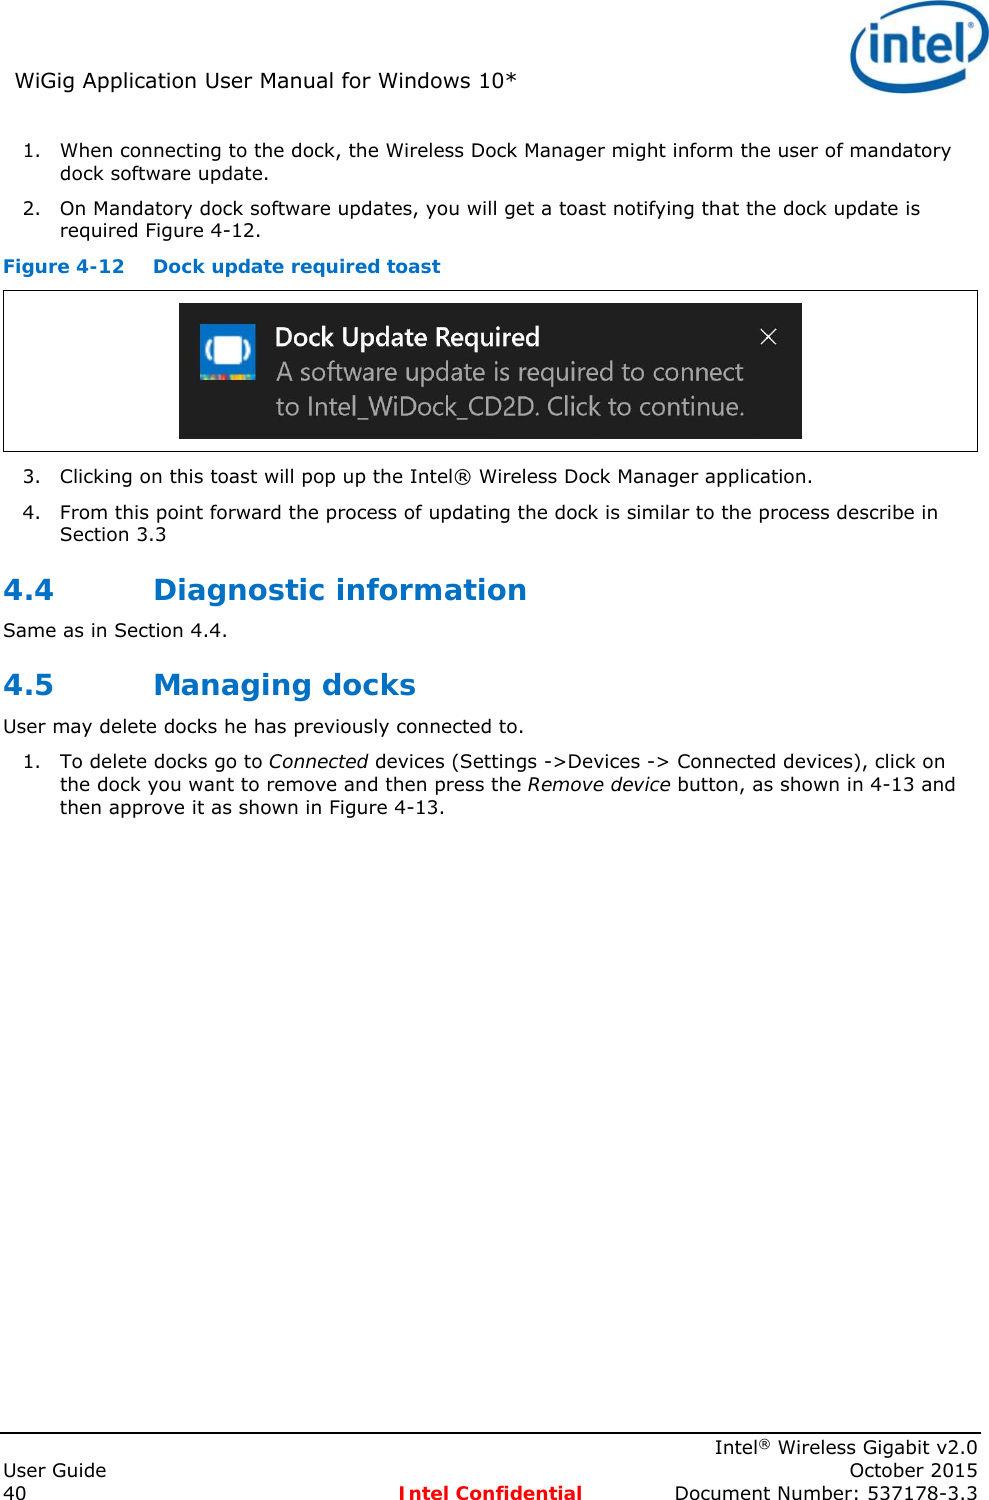 WiGig Application User Manual for Windows 10*      Intel® Wireless Gigabit v2.0 User Guide    October 2015 40 Intel Confidential  Document Number: 537178-3.3 1. When connecting to the dock, the Wireless Dock Manager might inform the user of mandatory dock software update. 2. On Mandatory dock software updates, you will get a toast notifying that the dock update is required Figure 4-12.  Figure 4-12  Dock update required toast  3. Clicking on this toast will pop up the Intel® Wireless Dock Manager application. 4. From this point forward the process of updating the dock is similar to the process describe in Section 3.3 4.4 Diagnostic information Same as in Section 4.4. 4.5 Managing docks User may delete docks he has previously connected to. 1. To delete docks go to Connected devices (Settings -&gt;Devices -&gt; Connected devices), click on the dock you want to remove and then press the Remove device button, as shown in 4-13 and then approve it as shown in Figure 4-13. 